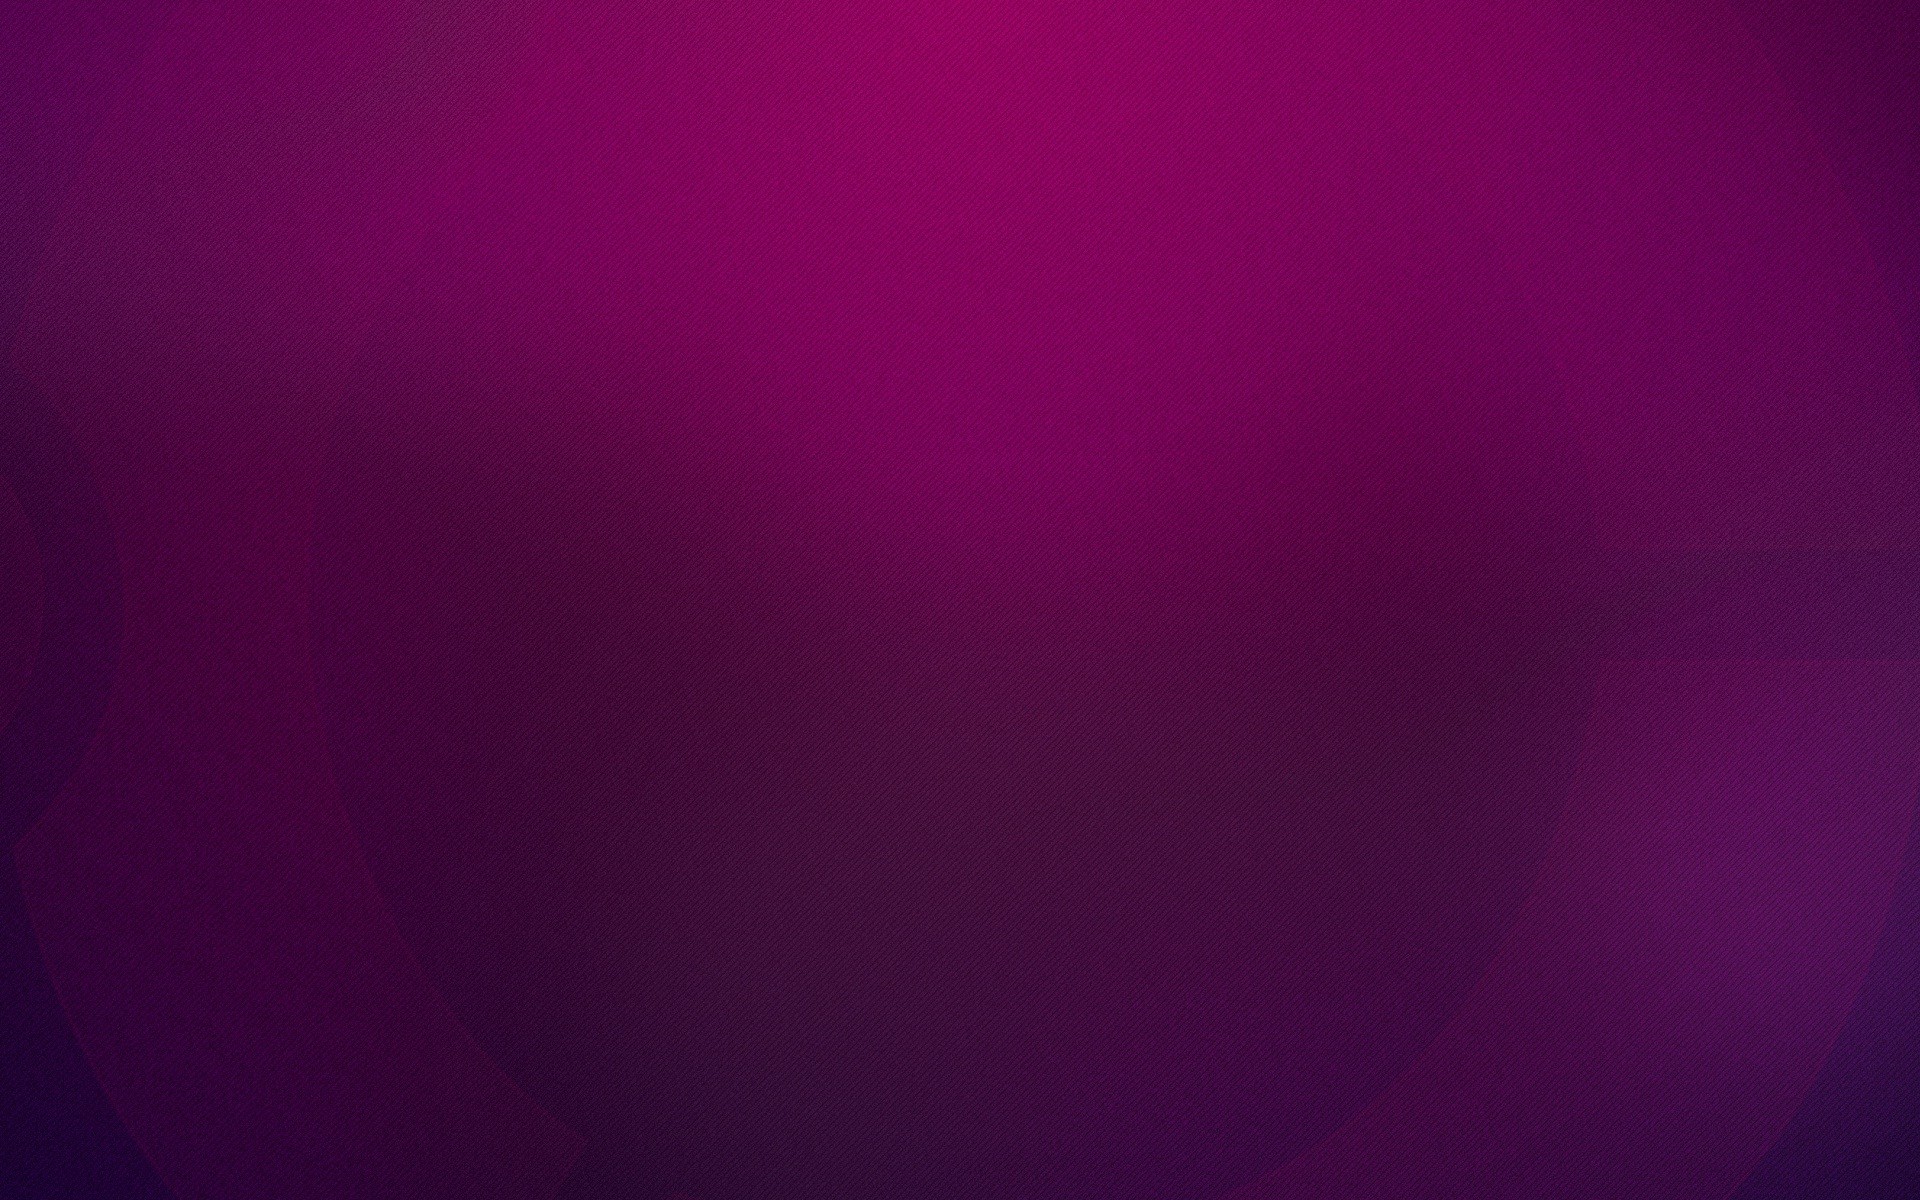 1920x1200 Dark purple and blue plain abstract wallpapers